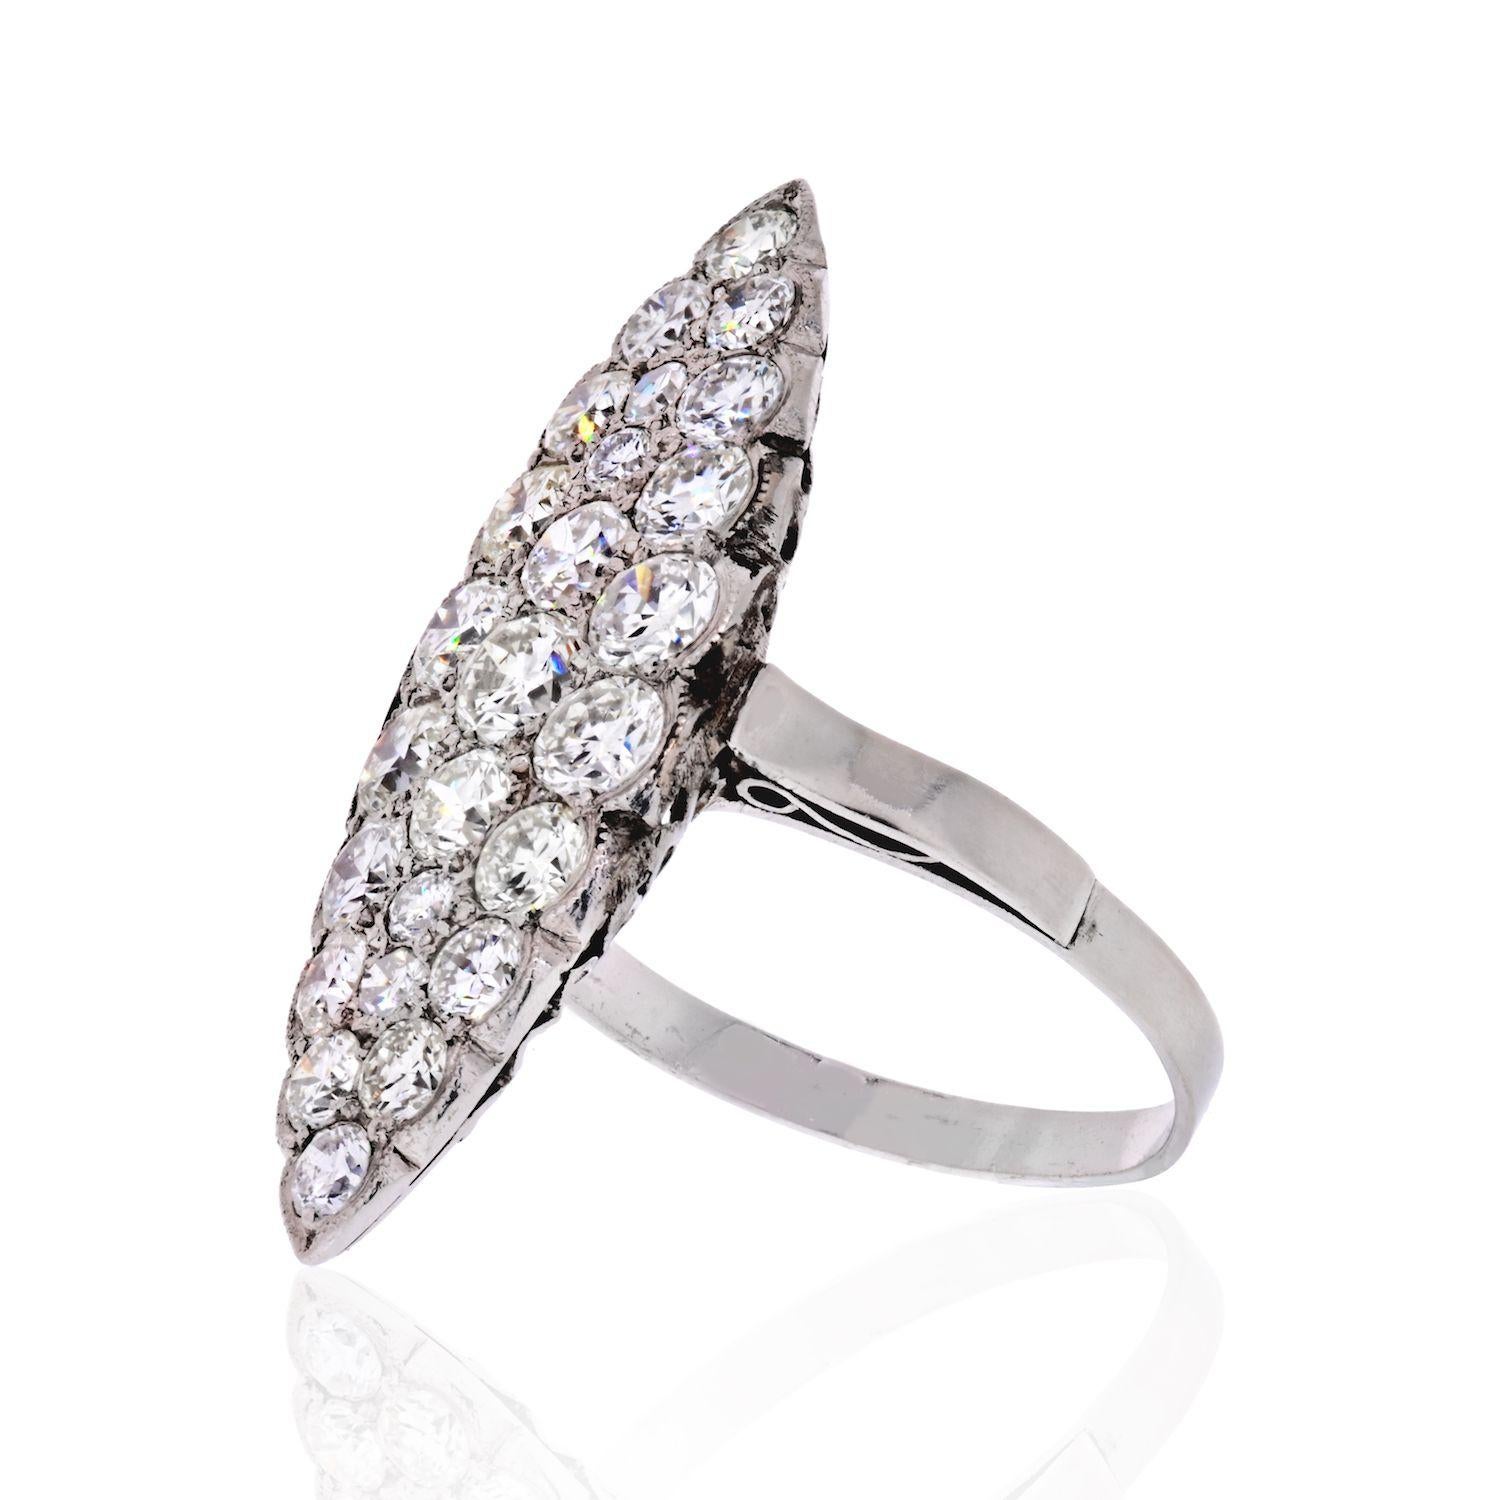 Navette Platinum 3.75 Carat Round Cut Diamond Ring
Set with 25 old-European cut diamonds. 
L: 32mm
W: 12mm
Size: 7.5
Sits flat on the finger with a delicate ajour under carriage. 